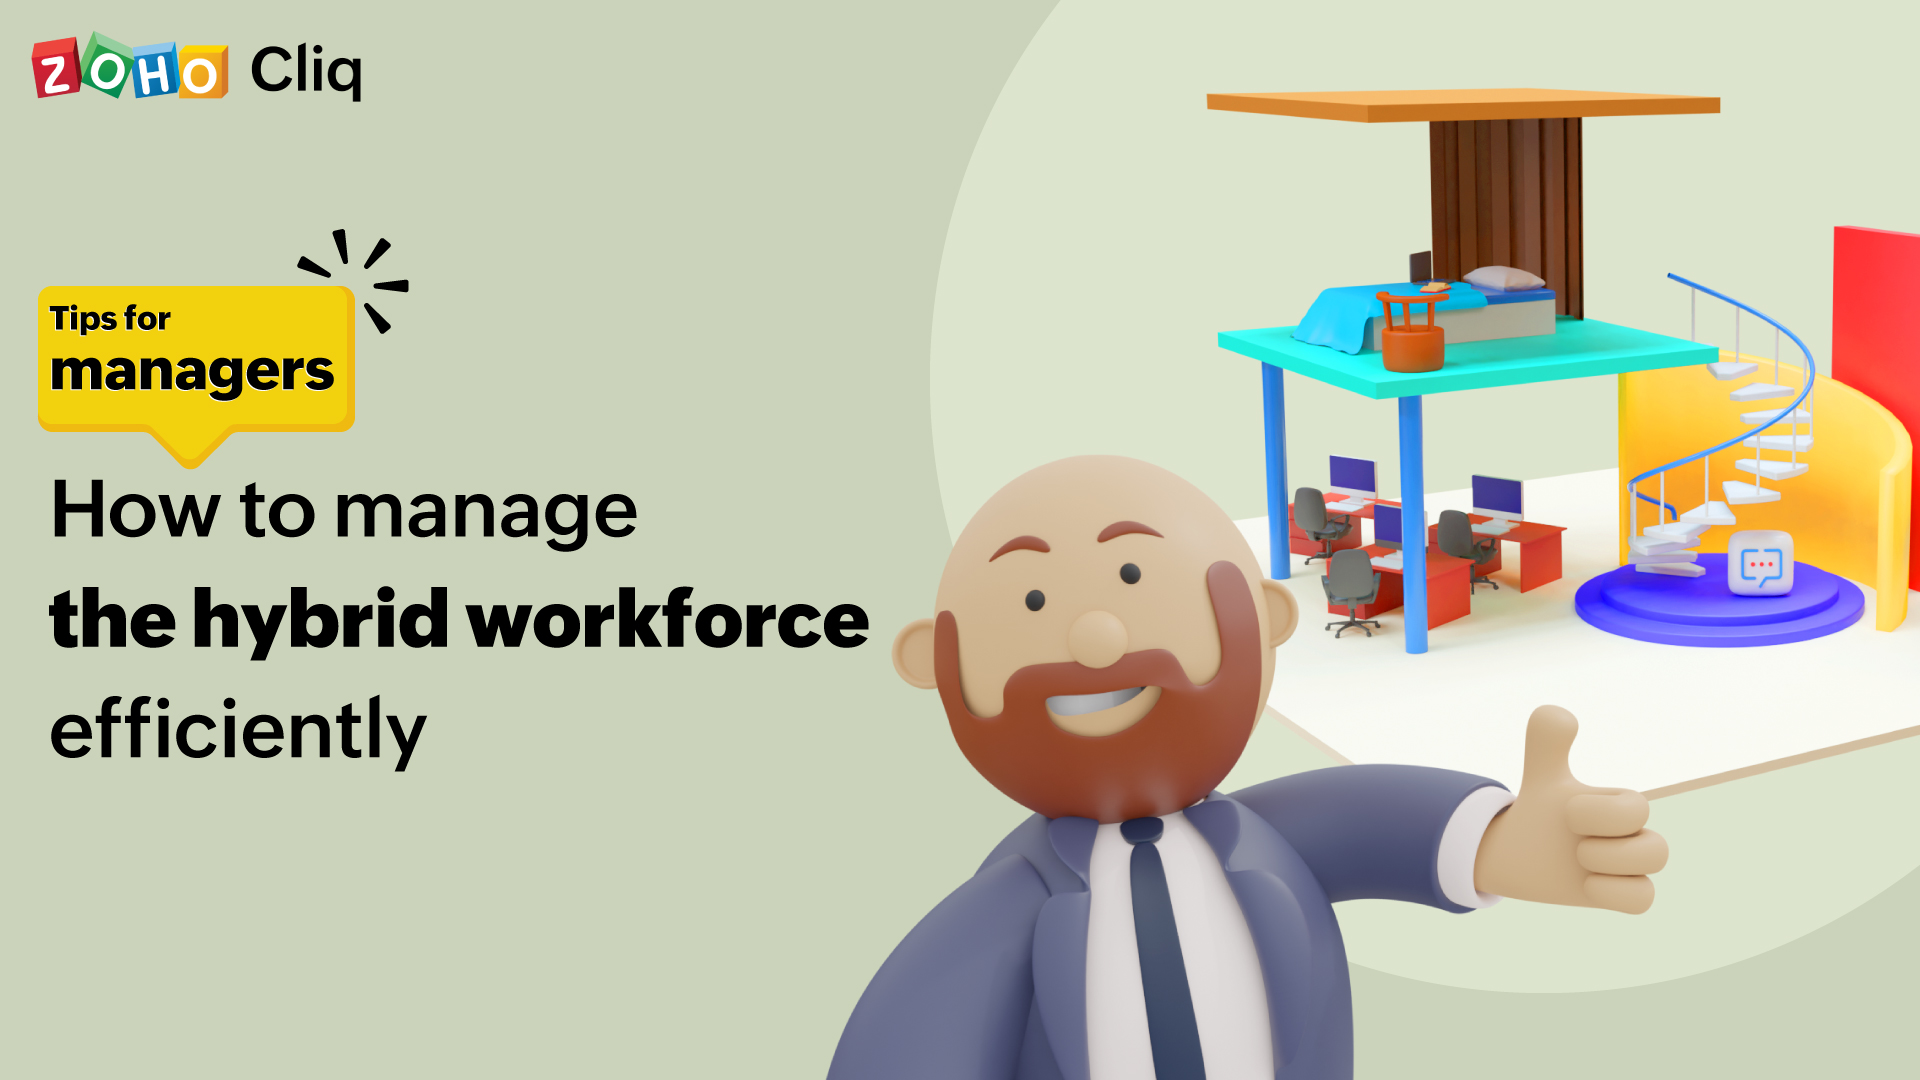 Tips for managers: How to manage your hybrid workforce efficiently